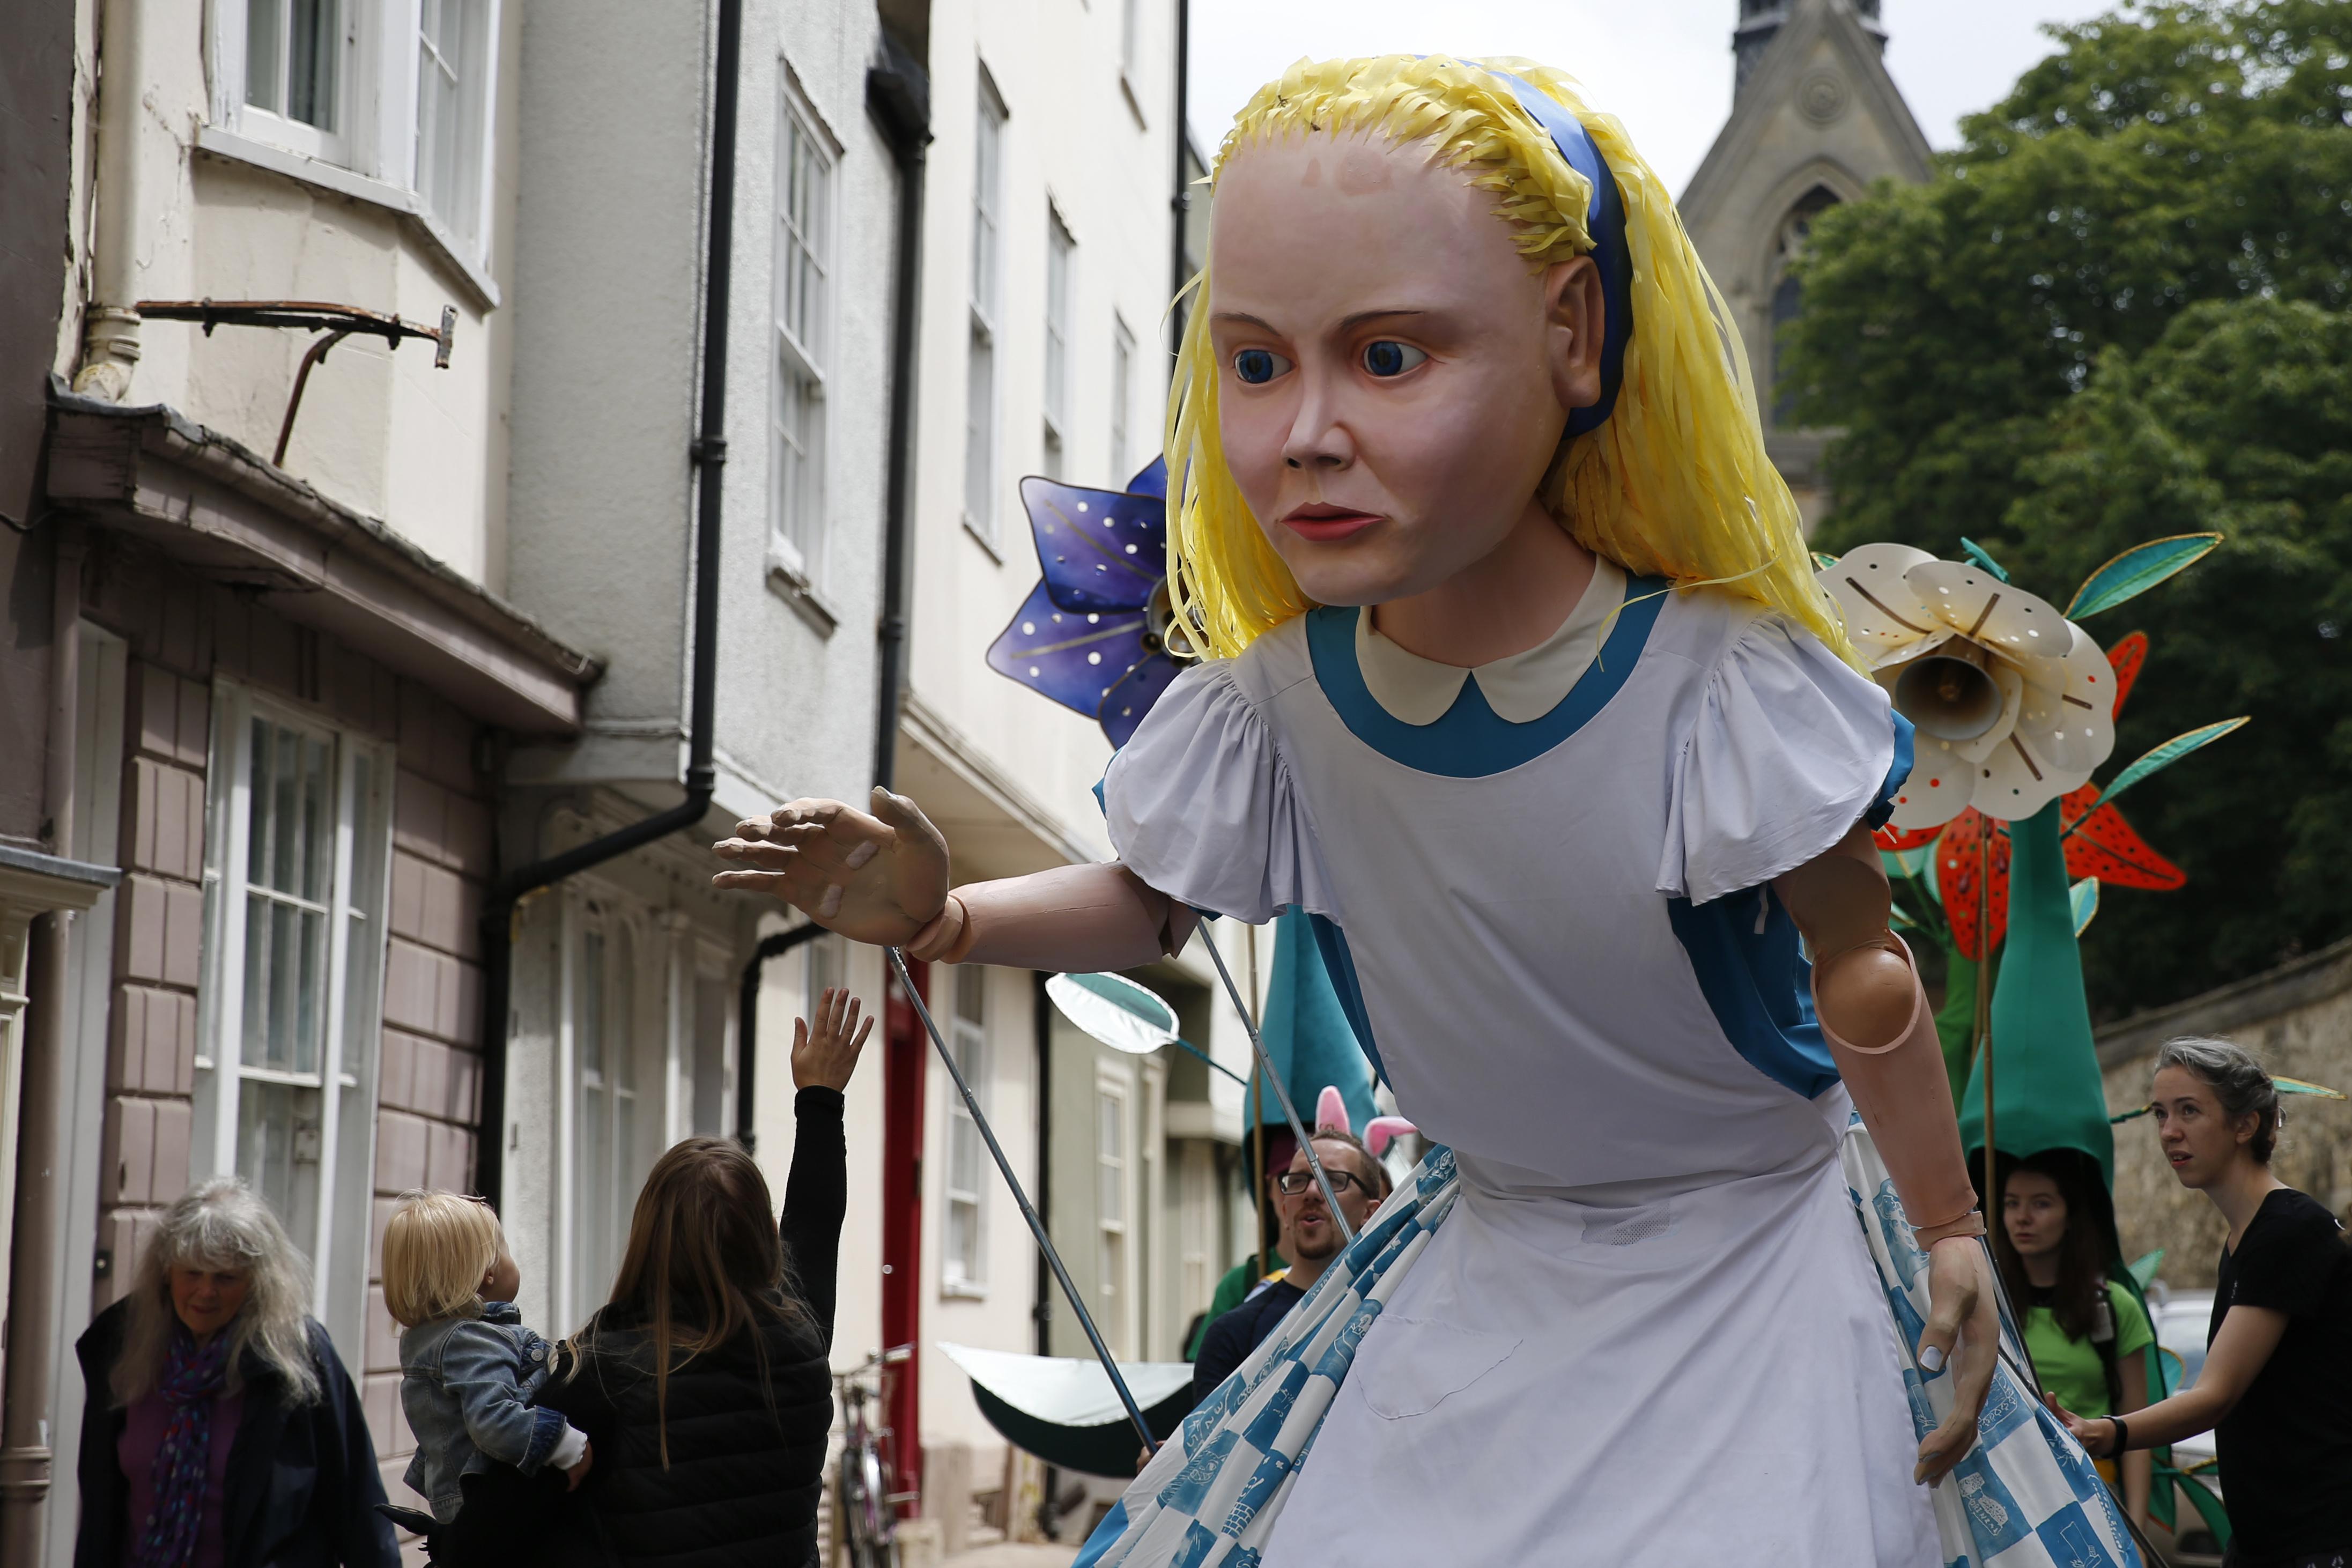 OXFORD, ENGLAND - JULY 03: An Alice in Wonderland puppet gestures to a child between performances on July 3, 2021 in Oxford, England. This year is the 150th anniversary of author Lewis Carroll's Through the Looking Glass, the sequel to Alice in Wonderland. The Alice's Day celebrations feature a 3.25 metre tall Alice puppet accompanied by huge talking flowers operated by puppeteers and an array of Alice in Wonderland characters that will roam the streets of Oxford interacting with the public. (Photo by Hollie Adams/Getty Images)